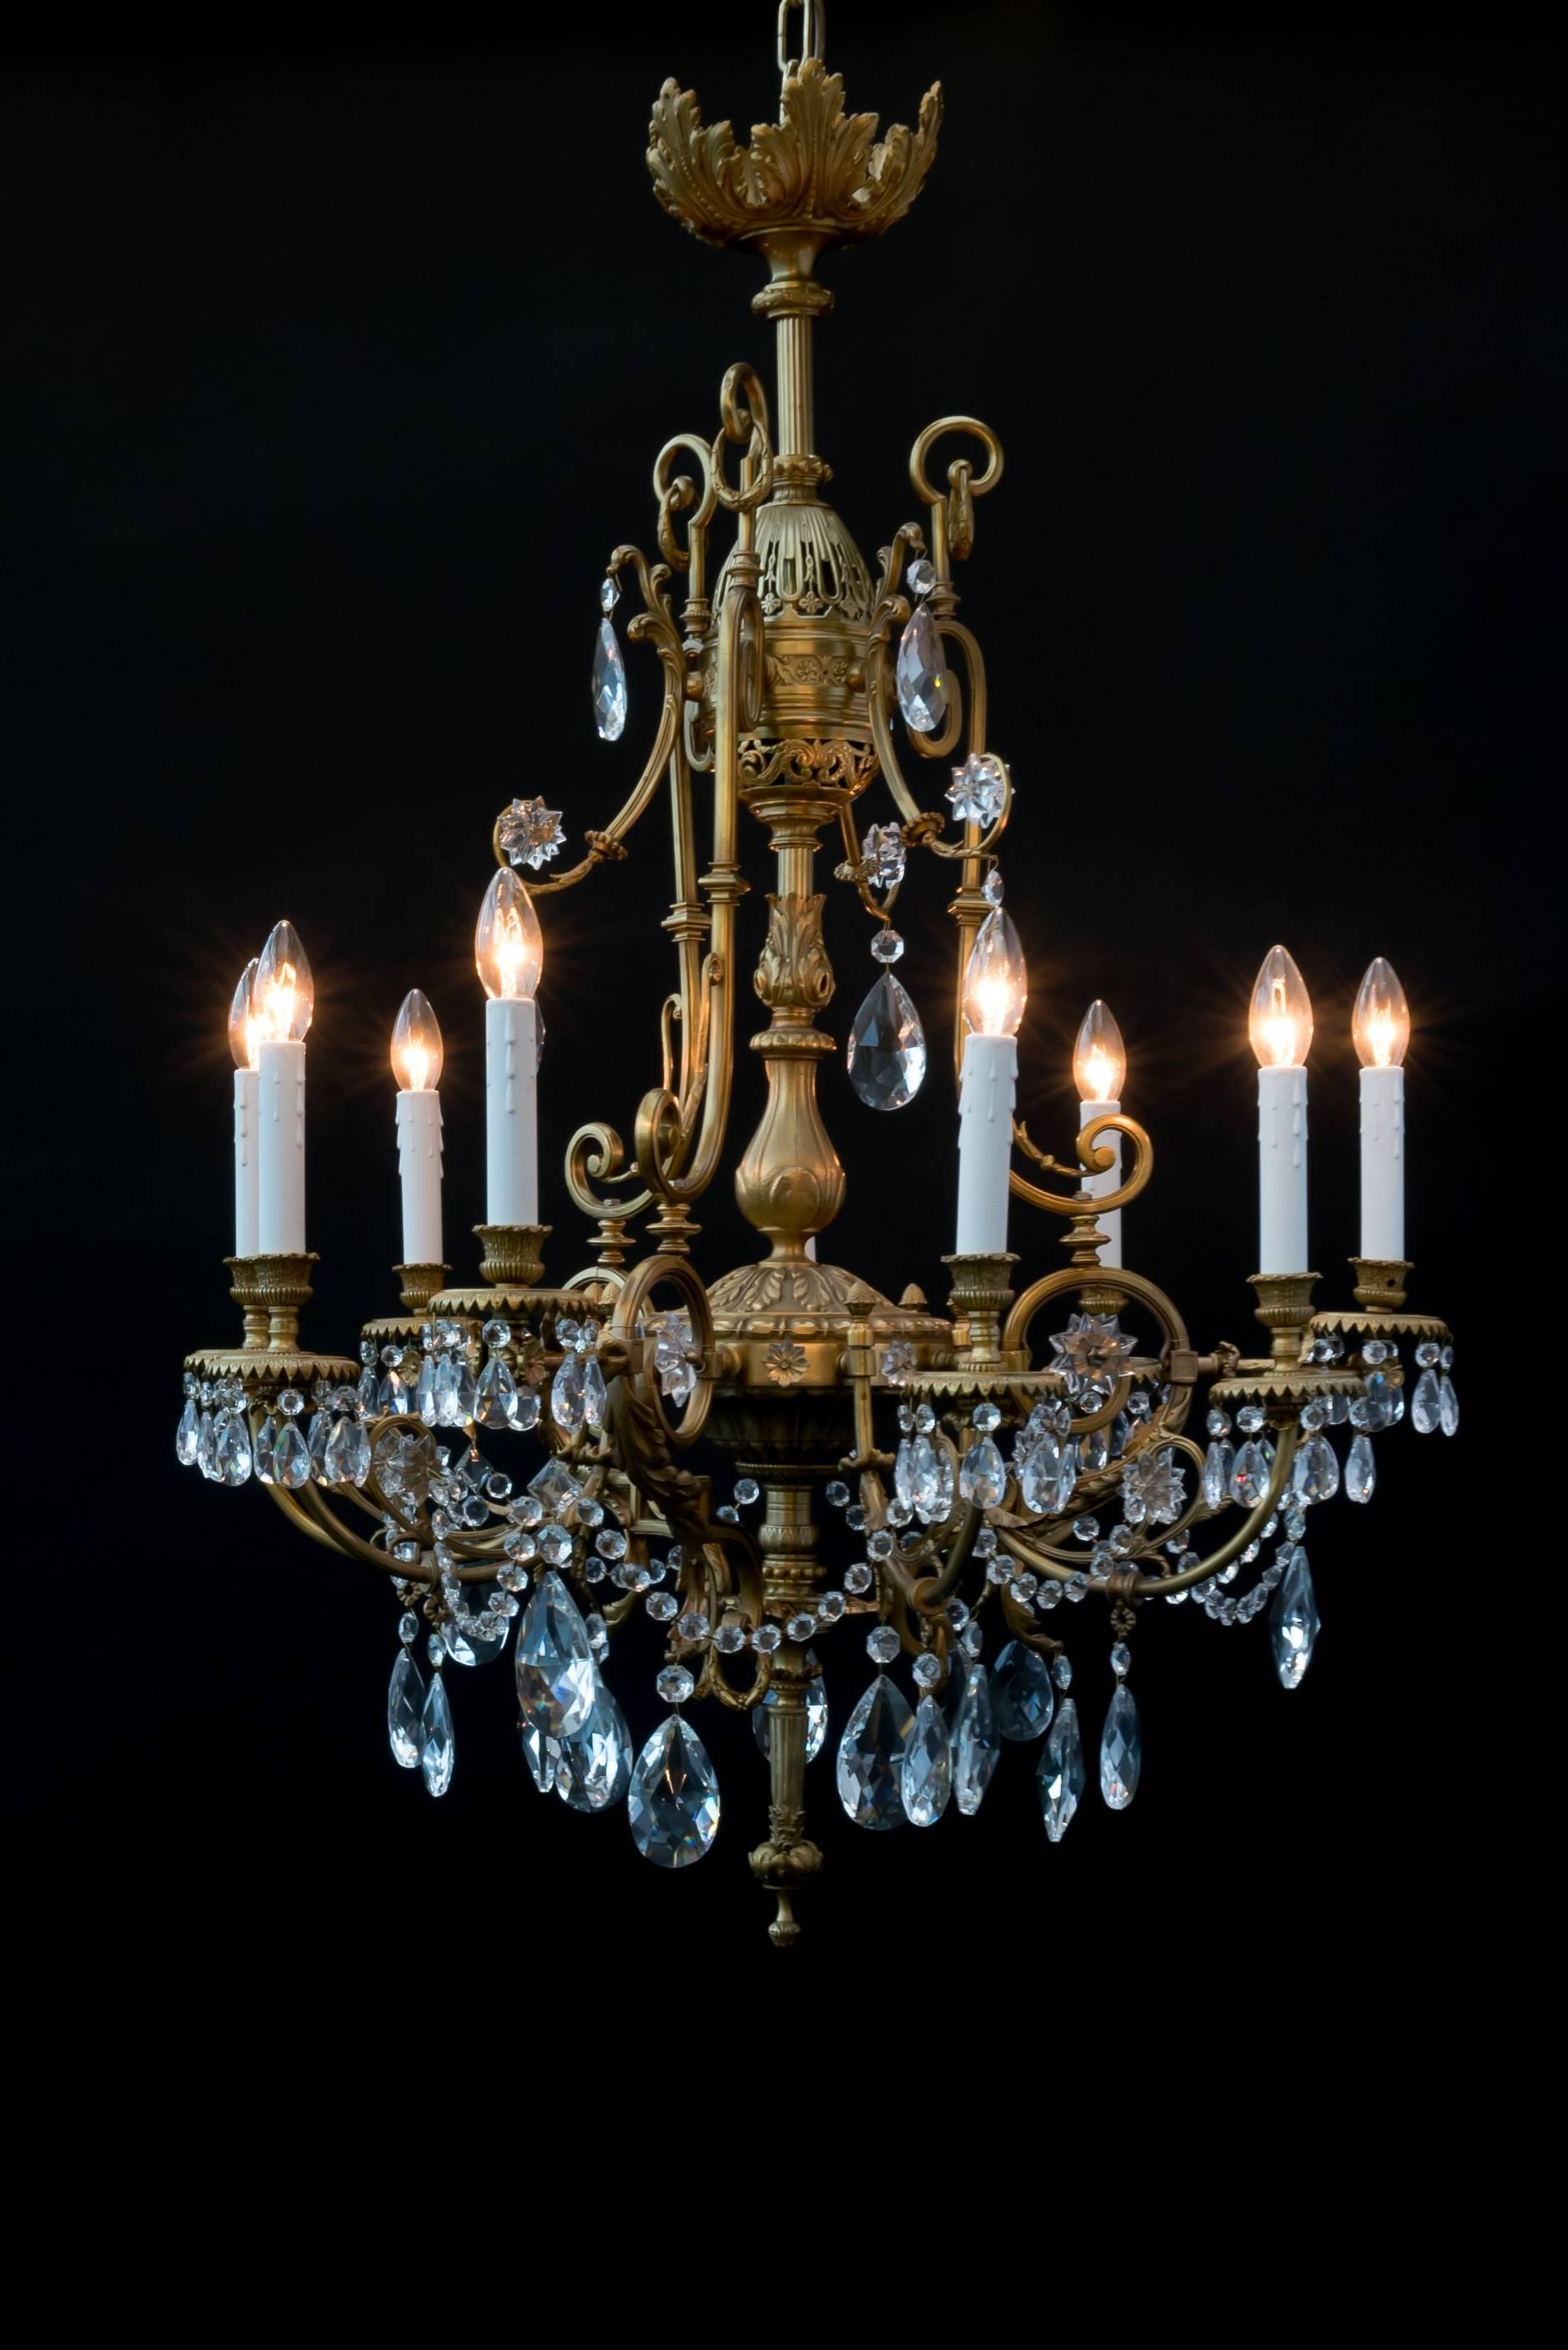 Gorgeous French chandelier in neoclassical style.
Made of bronze in Paris, circa 1860.
Intended for gaslight and later converted to electricity.
Bohemian crystal parts.
Unique elegant chandelier.

